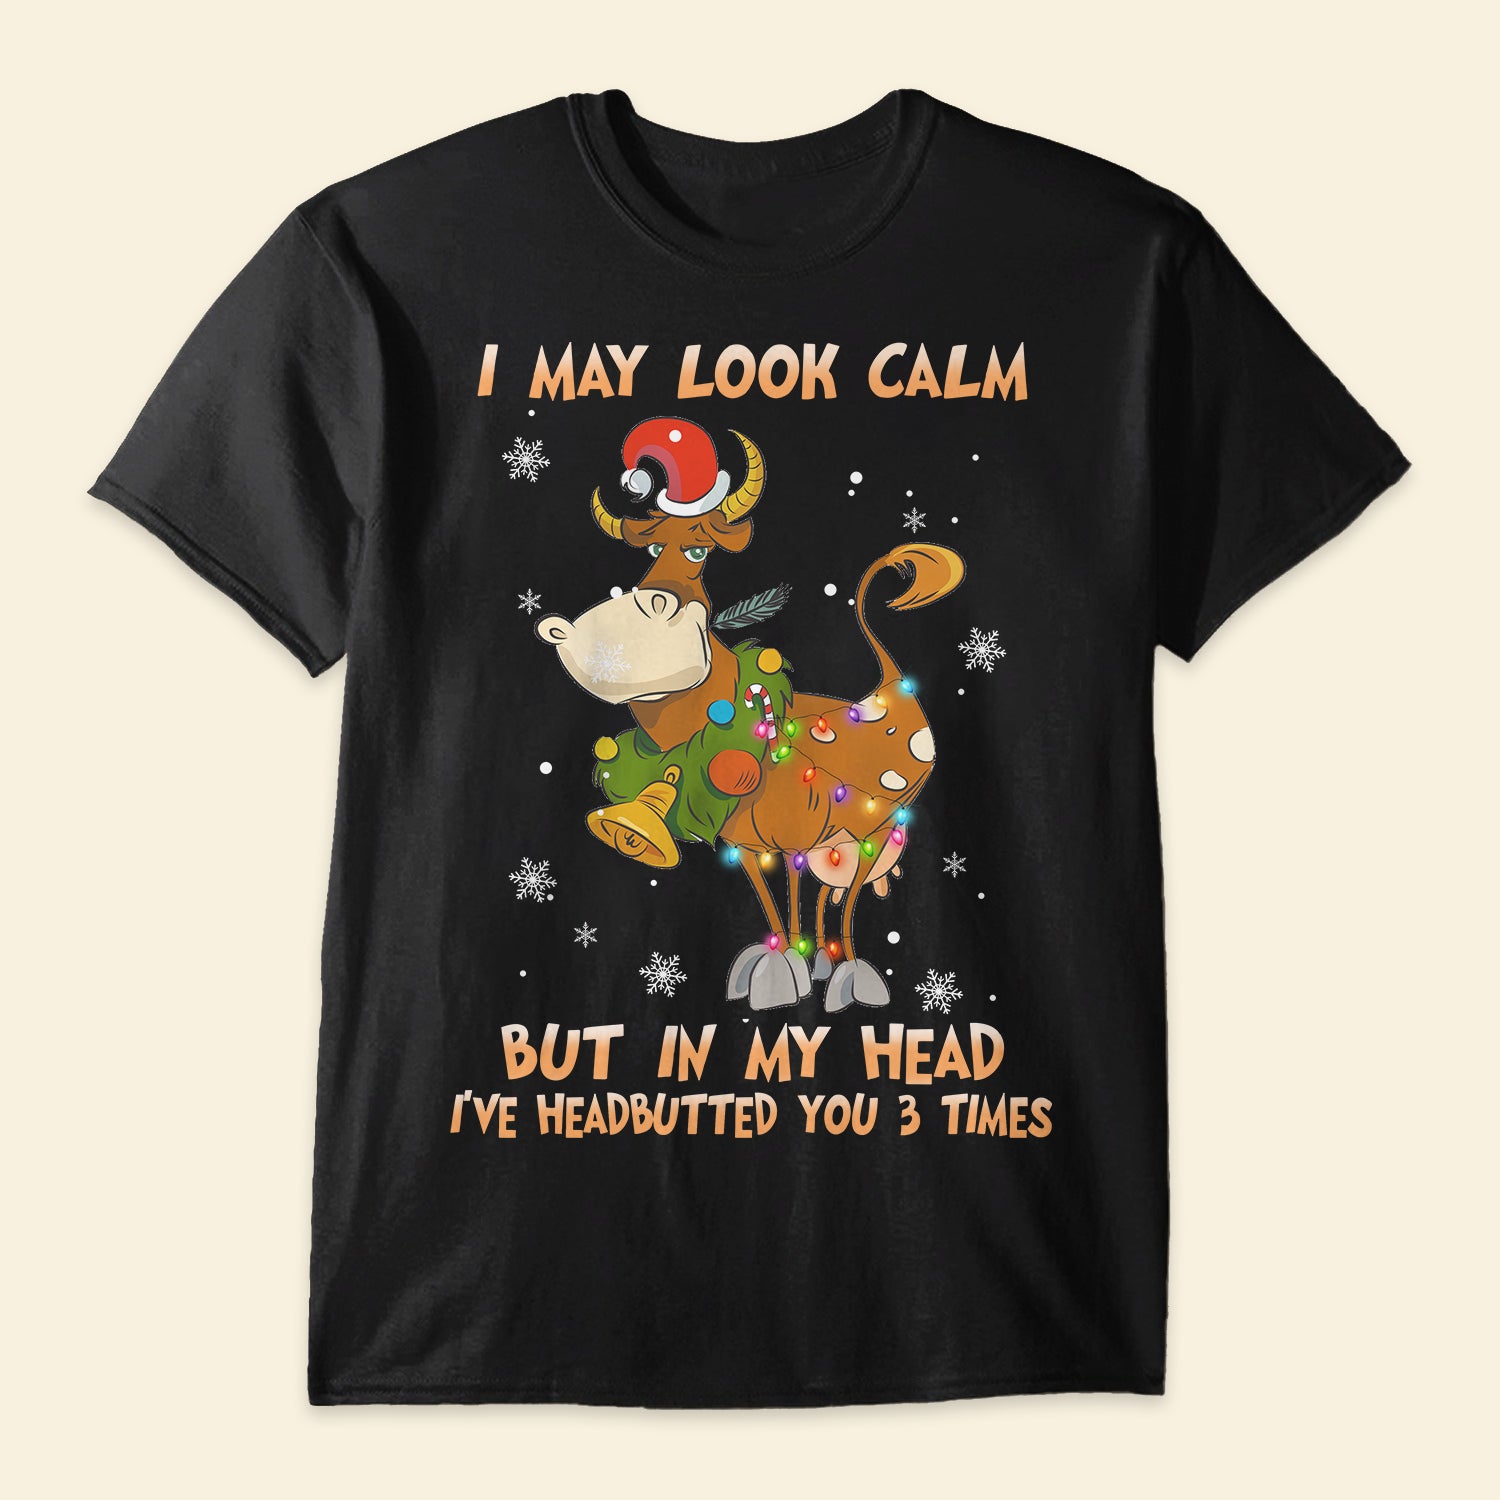 Cow Headbutted You Three Times - Shirt